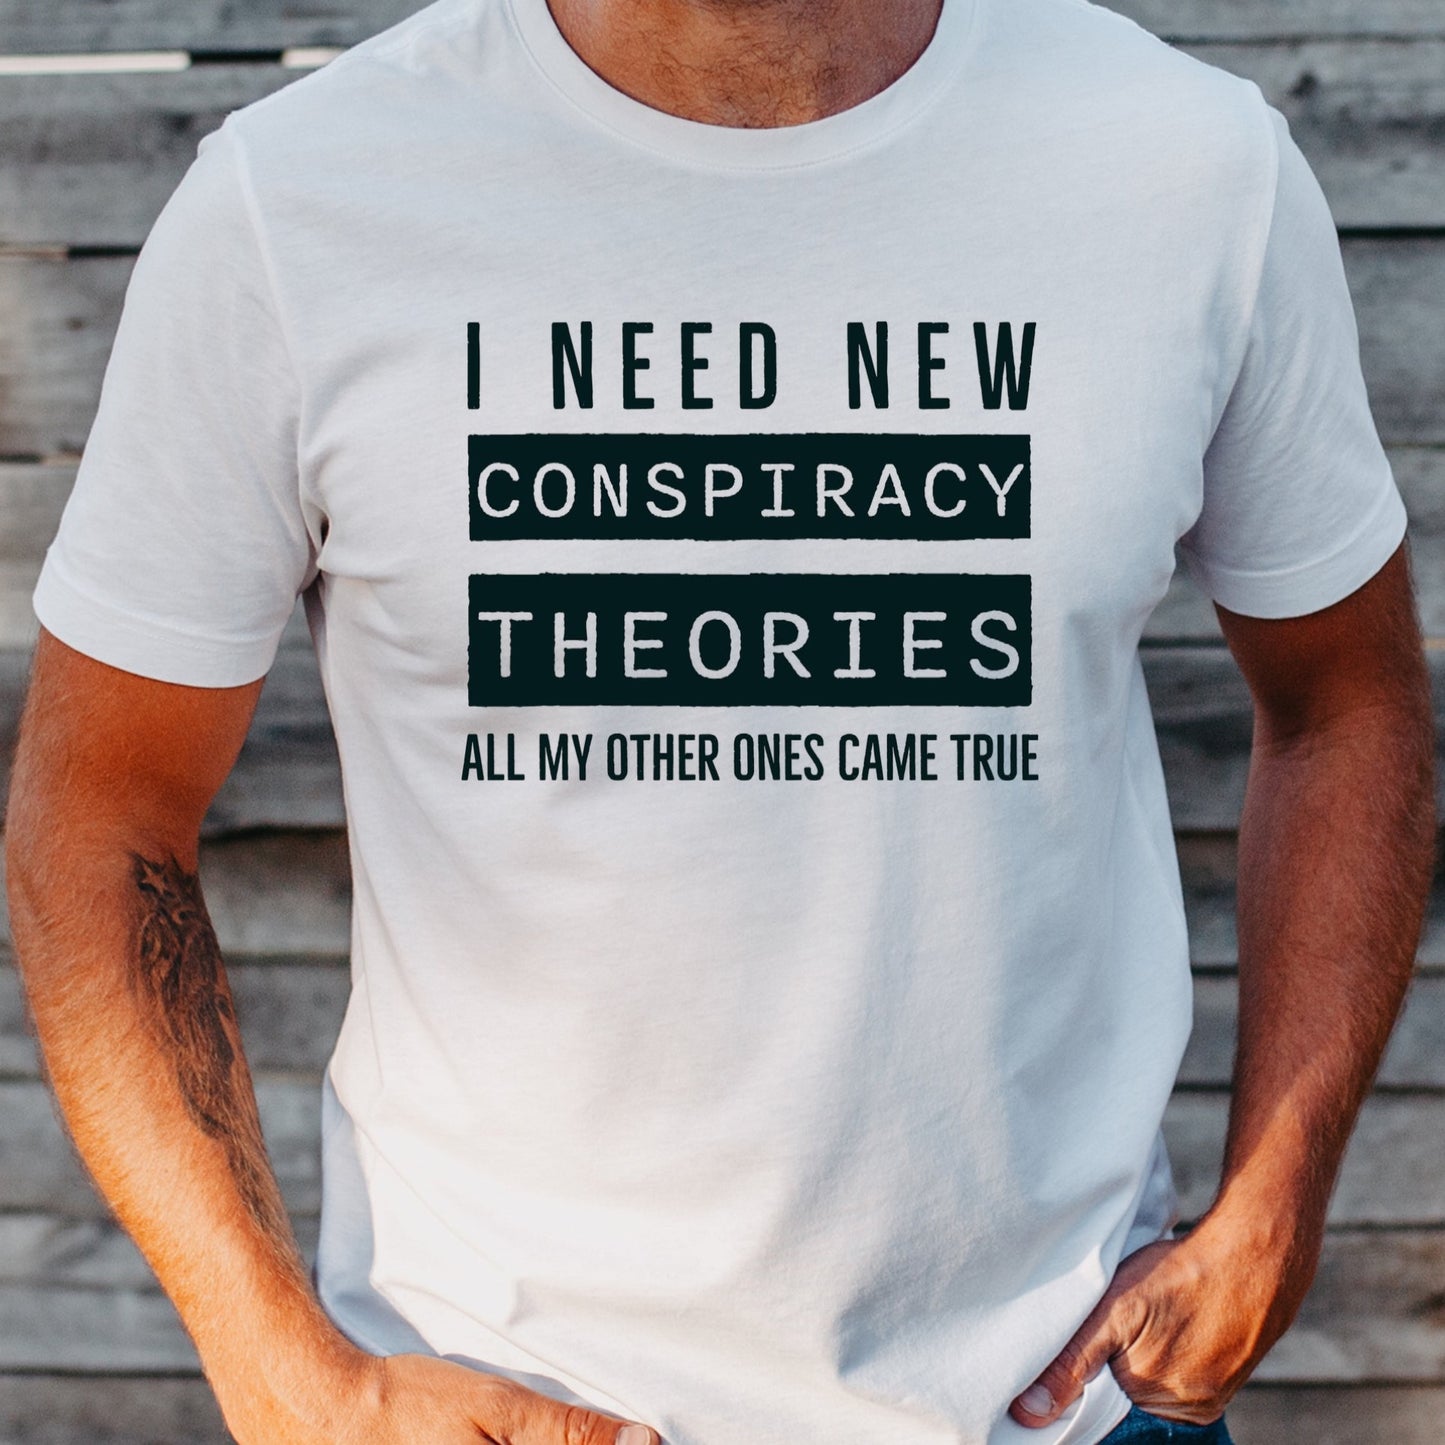 Conspiracy Theories T-Shirt For Conservative TShirt For Patriot Shirt For Conspiracy Theorist Gift For Political People T Shirt